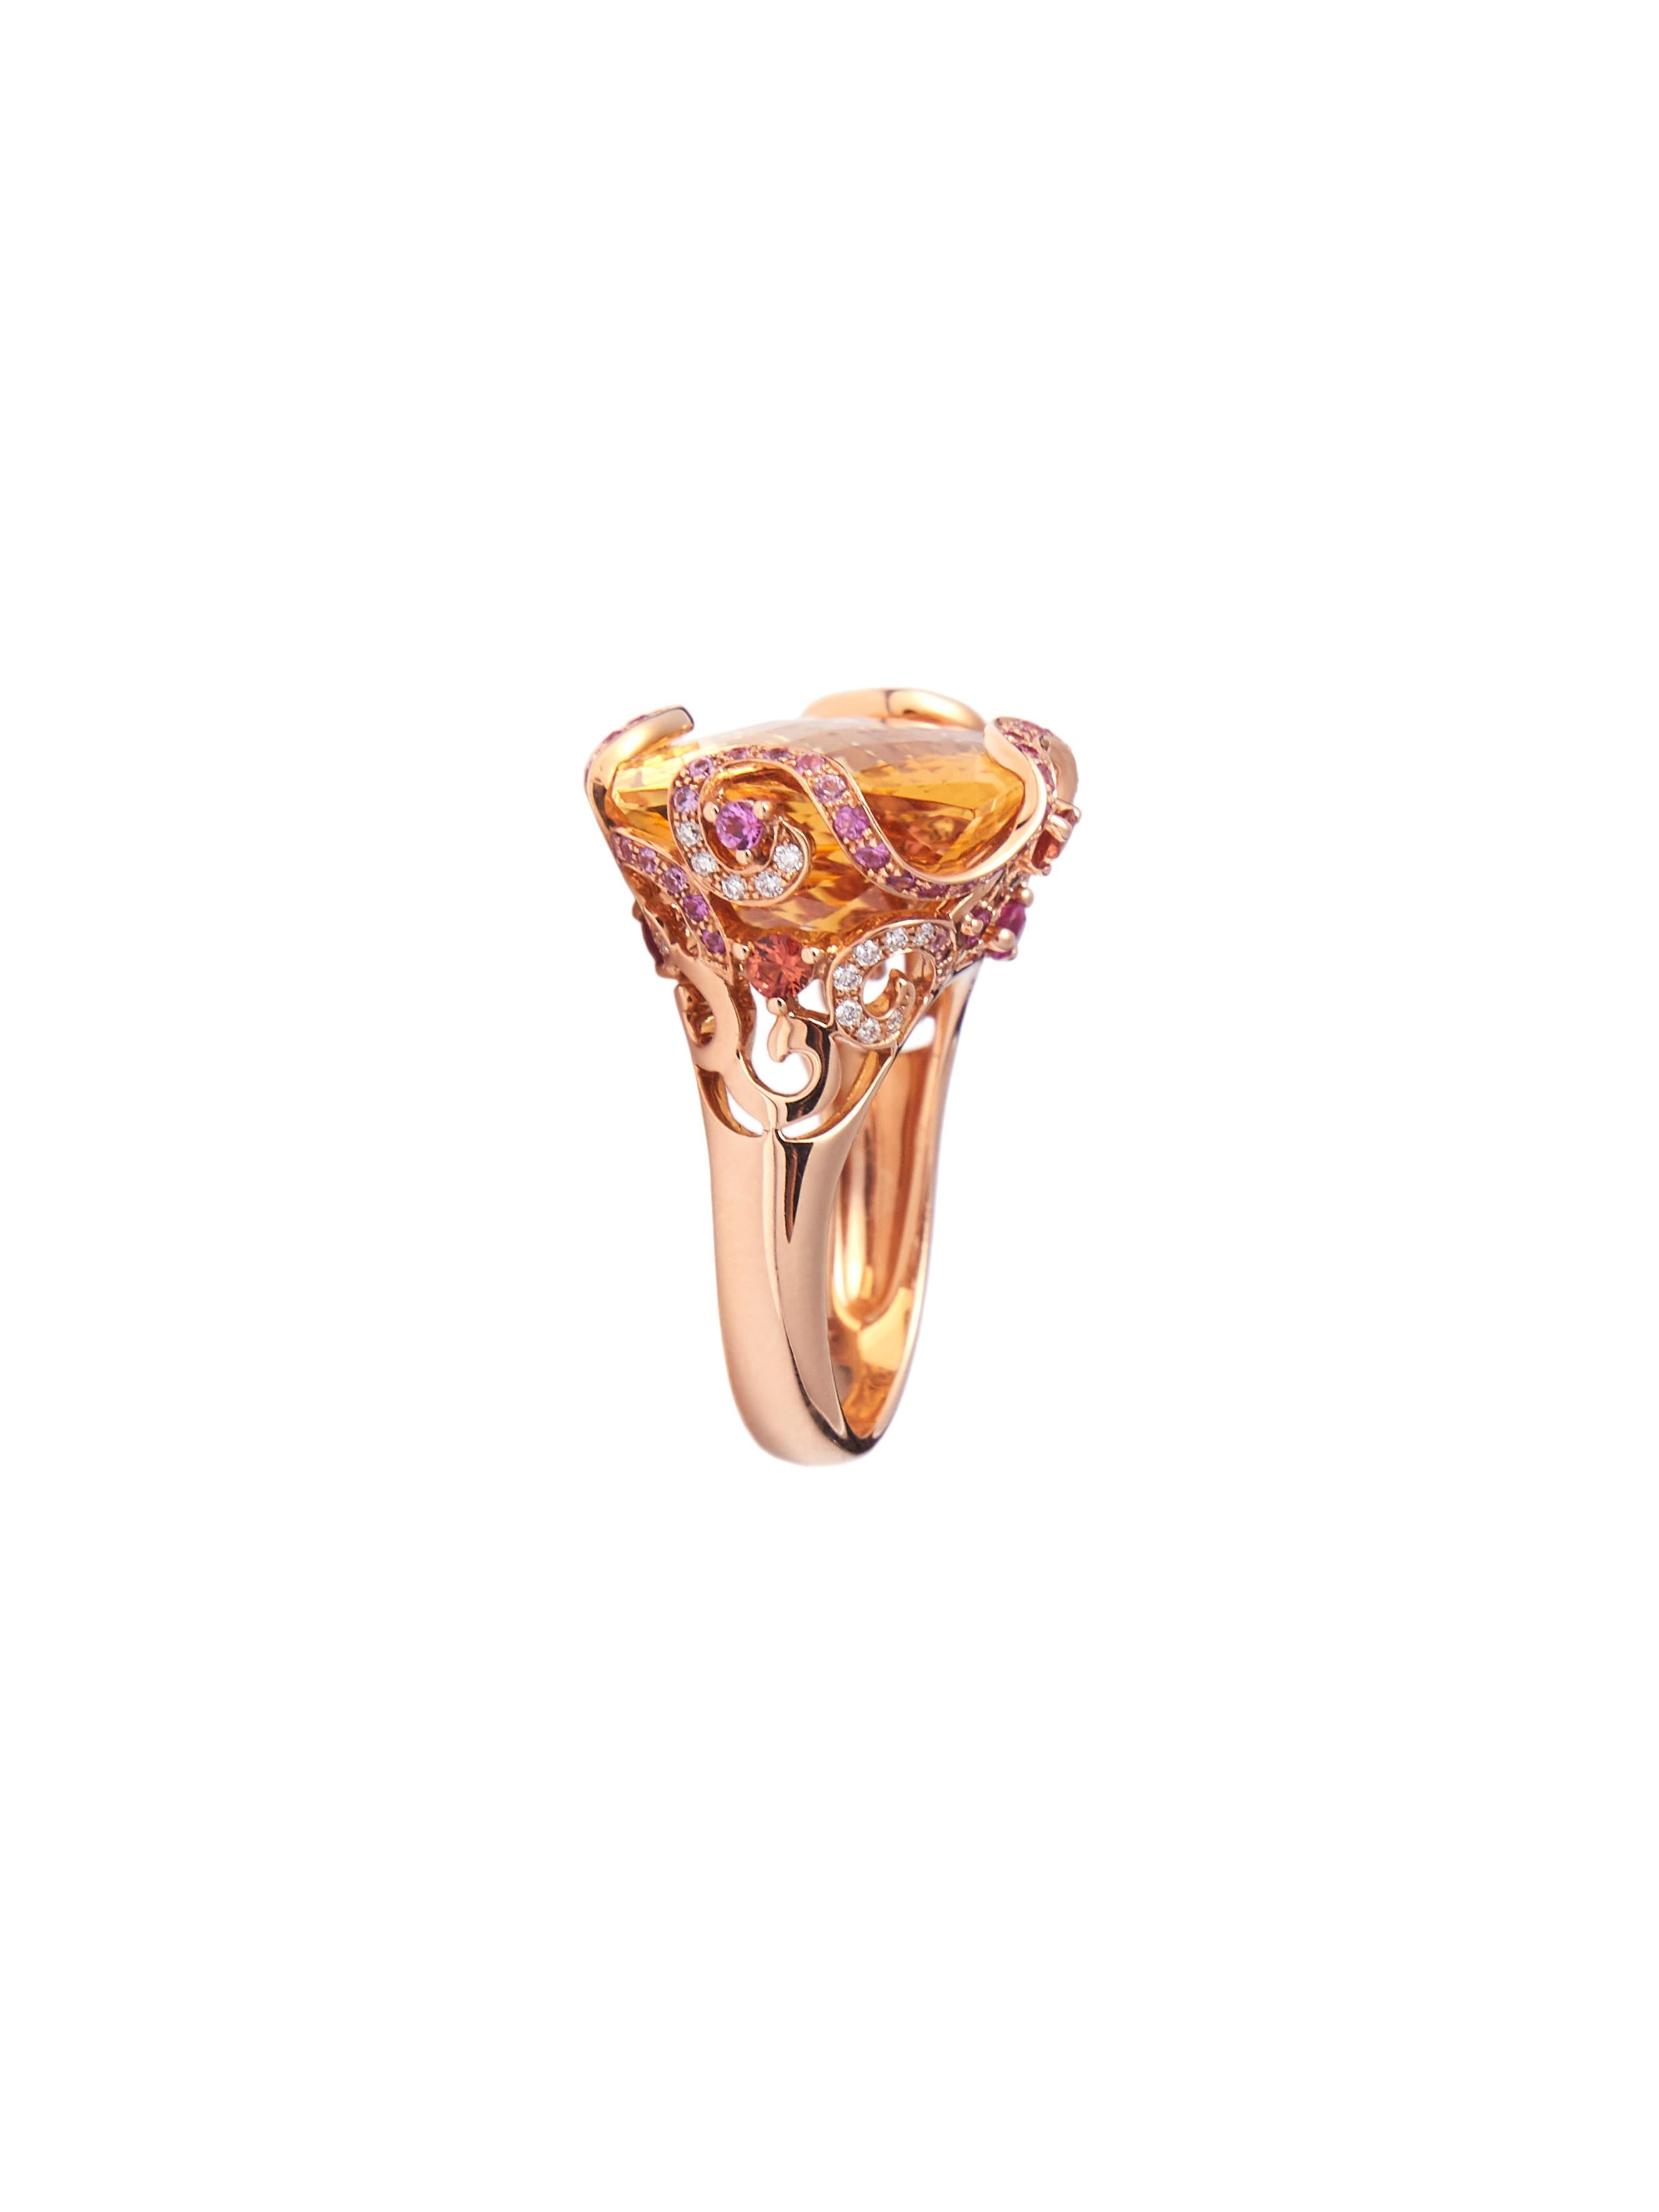 18 Karat Rose Gold Ring with Smokey Quartz Diamonds and Pink Sapphire For Sale 4